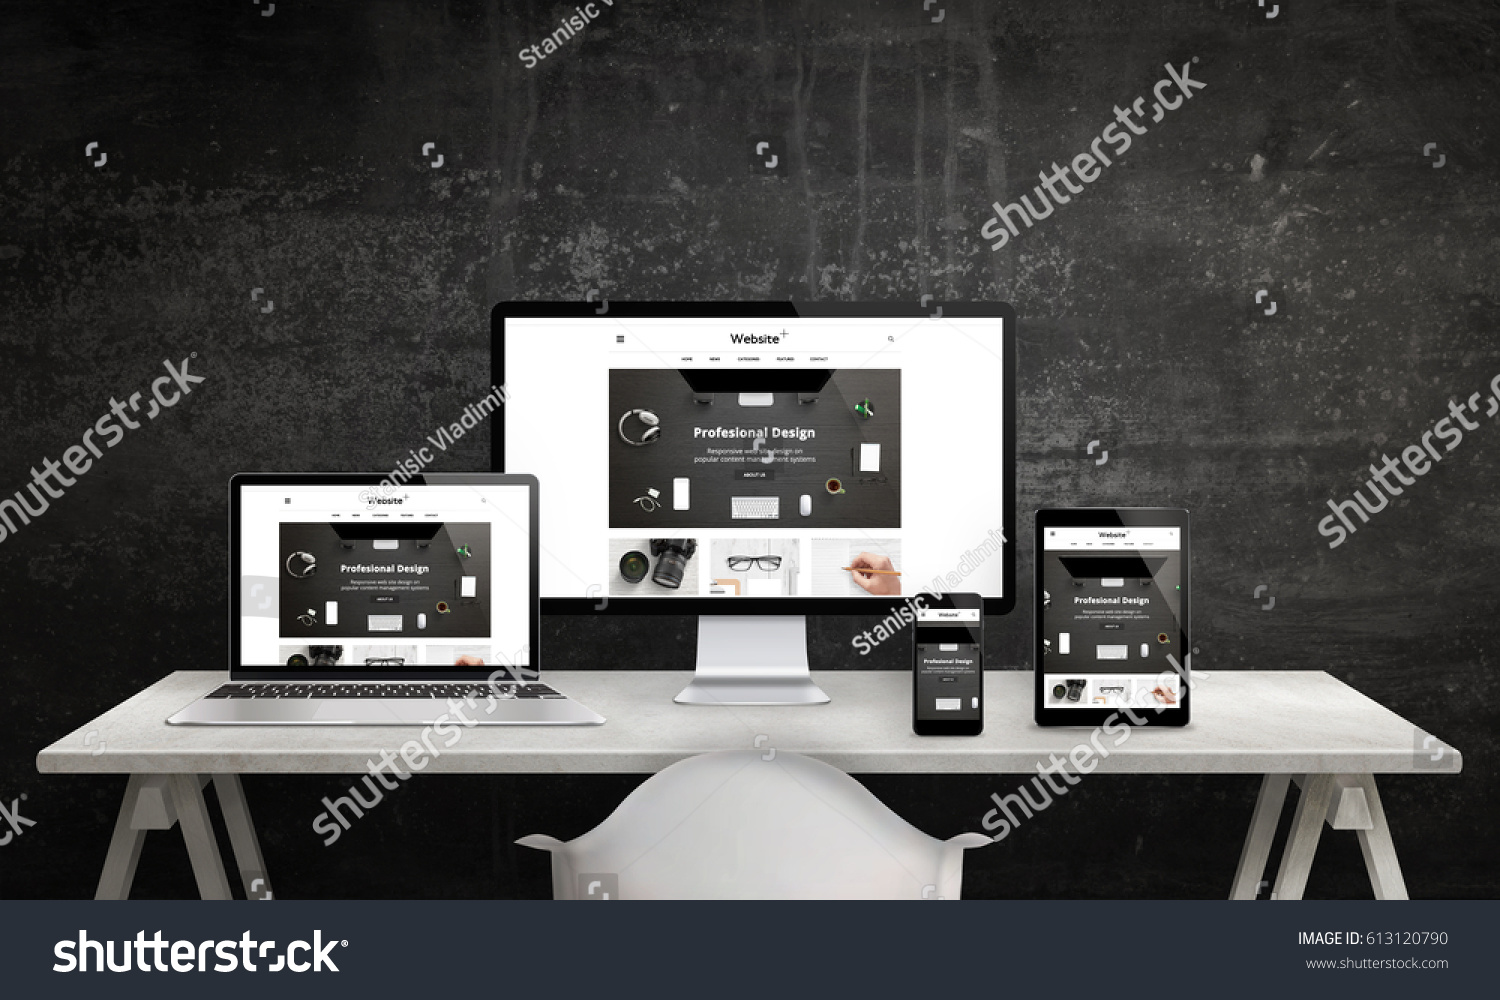 Responsive web site promotion on computer display, laptop, tablet and smart phone. Modern, clean web design. White office desk with devices, black wall in background. #613120790